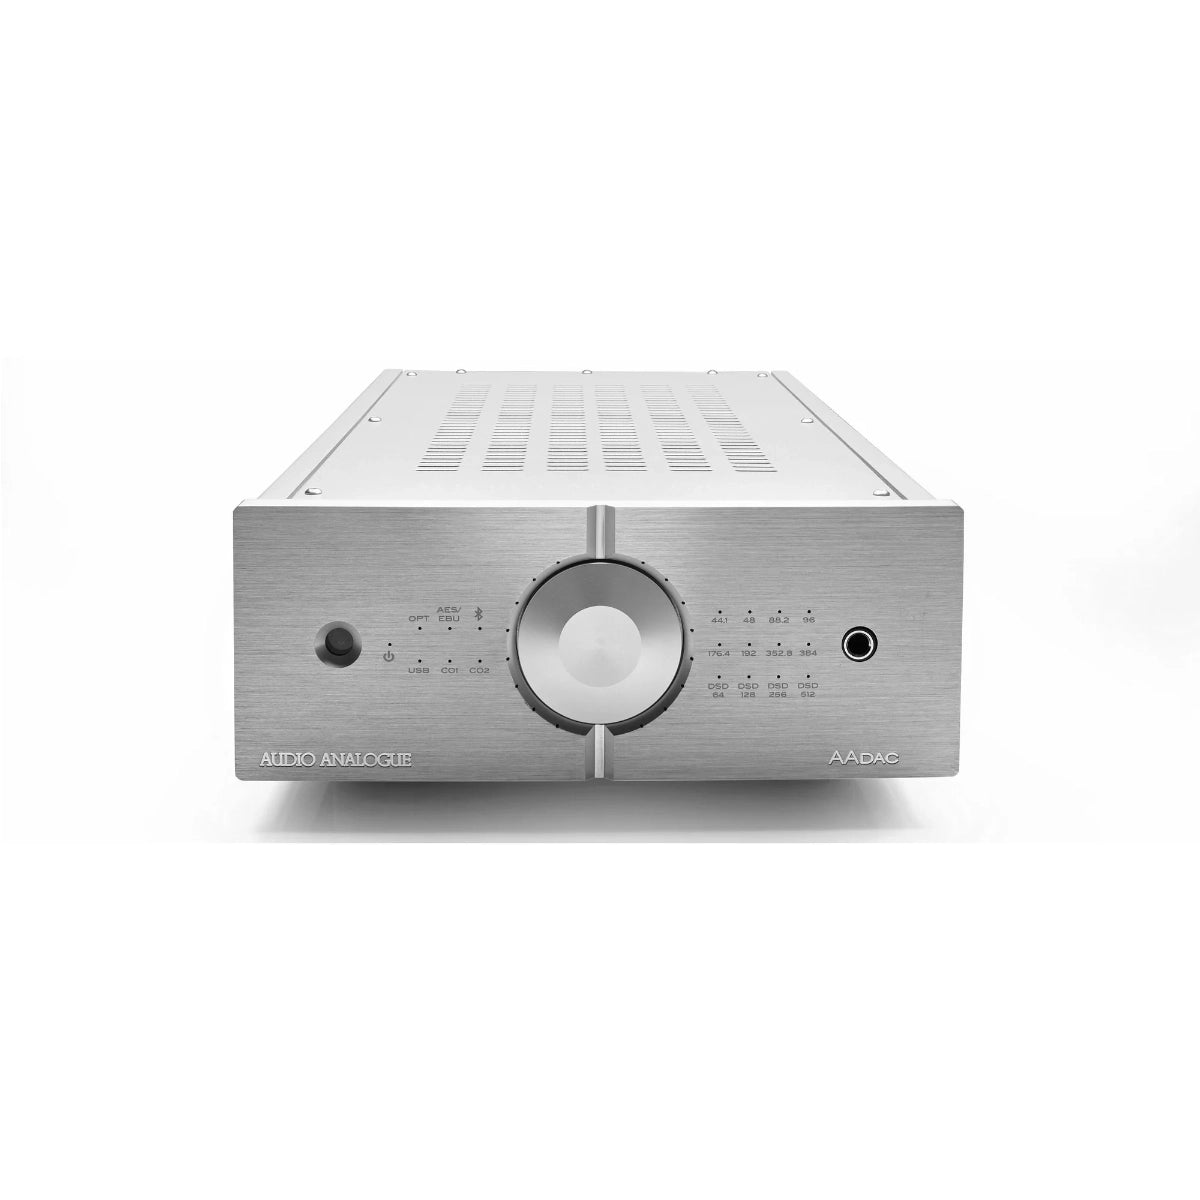 An image of Audio Analogue's AADAC digital to analogue converter in silver, with BT